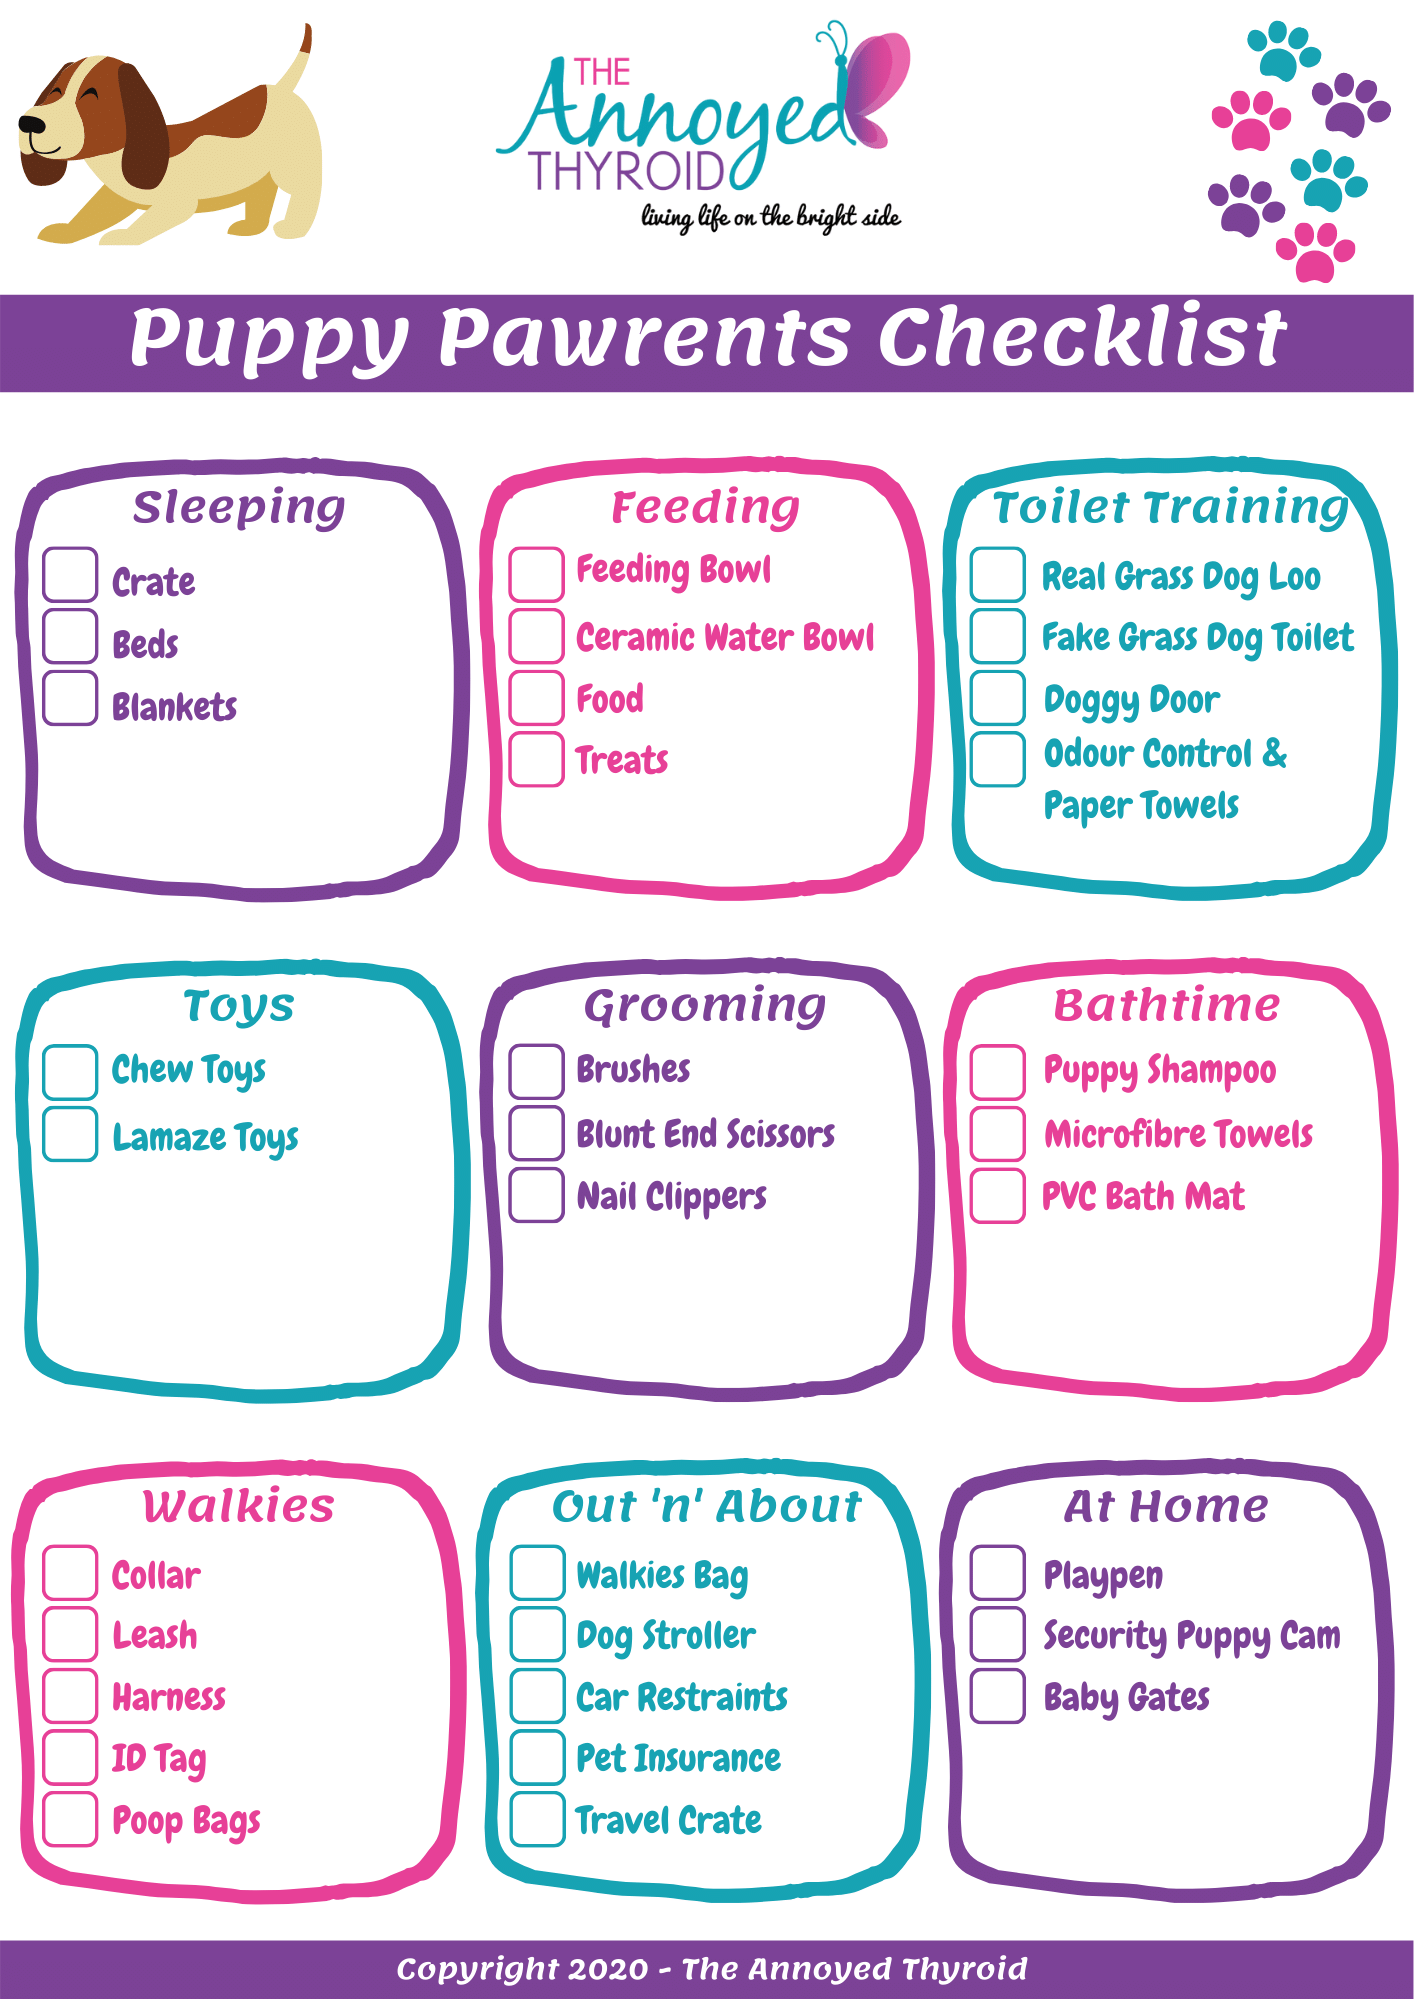 https://www.theannoyedthyroid.com/wp-content/uploads/2020/05/New-Puppy-Checklist.png